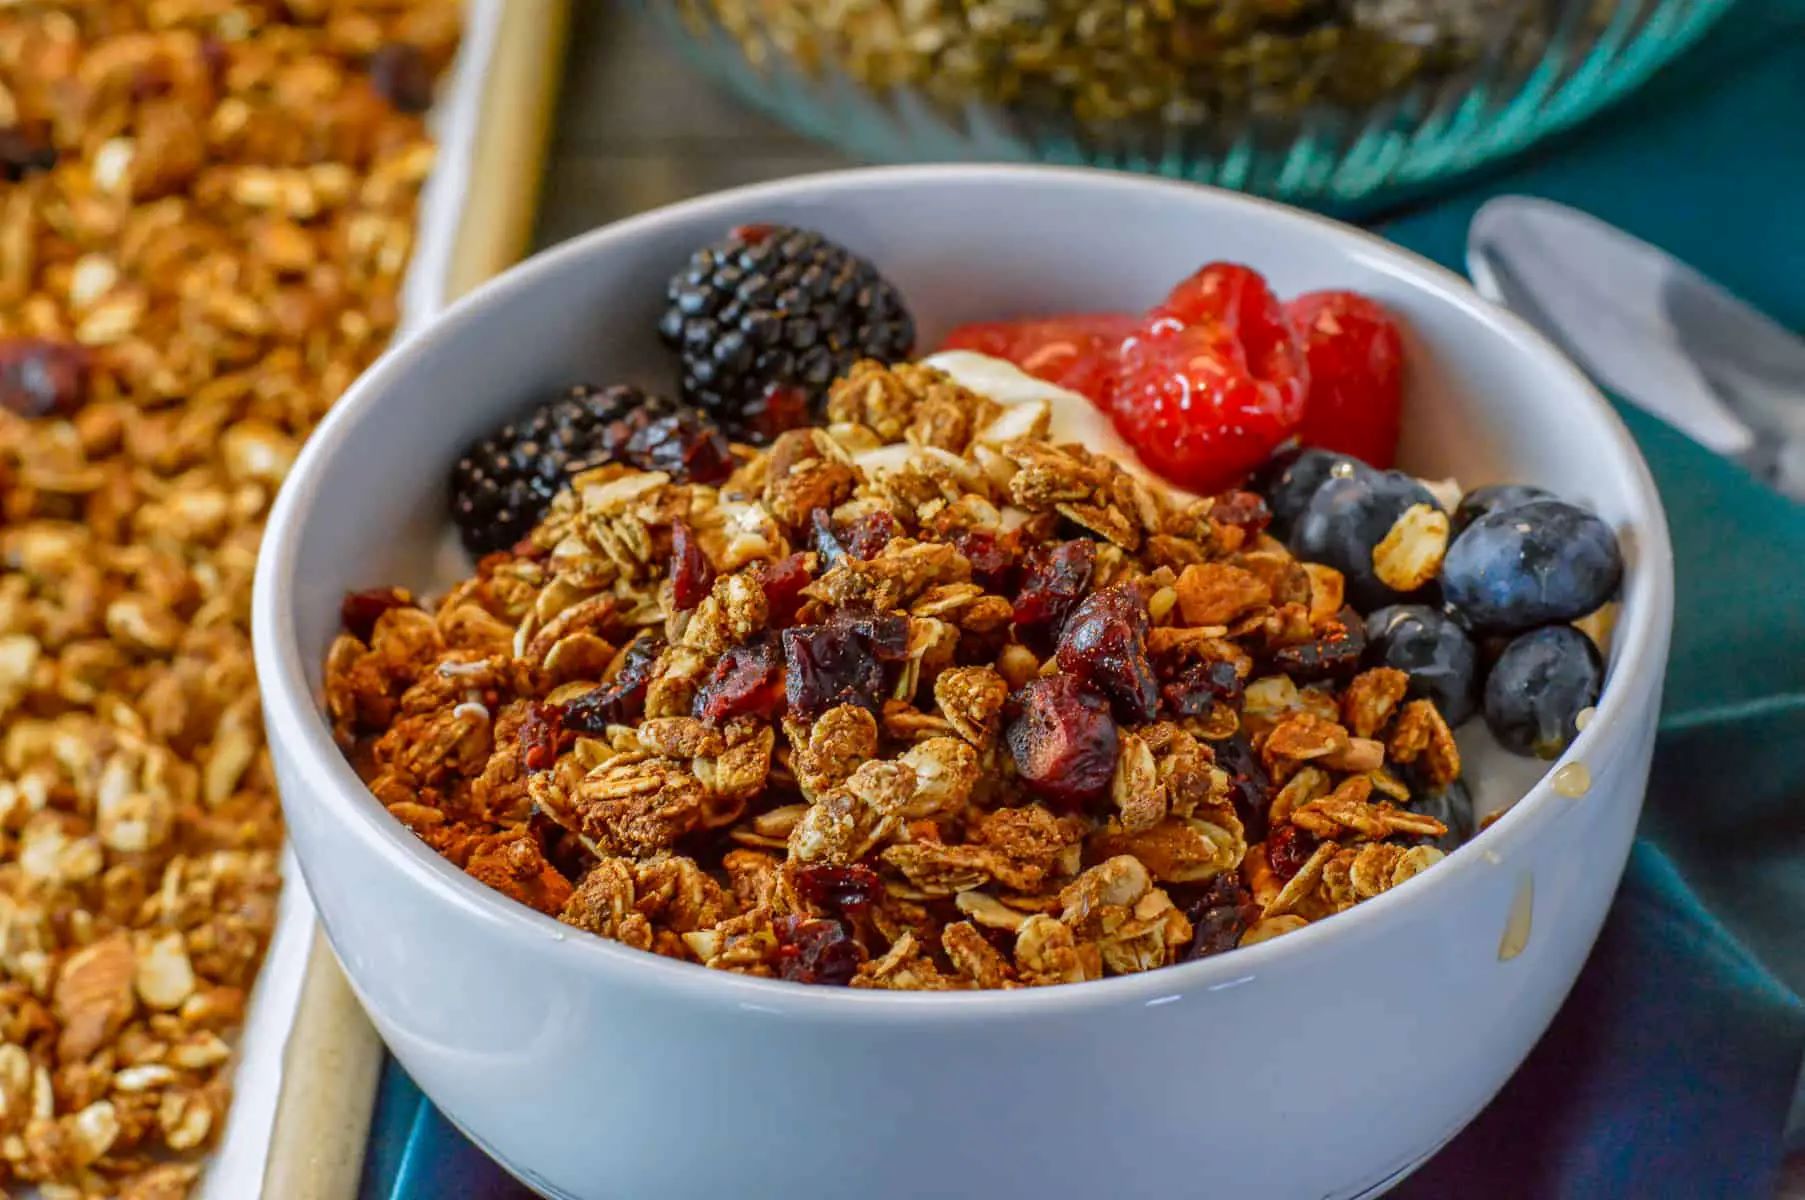 11-nutrition-facts-for-granola